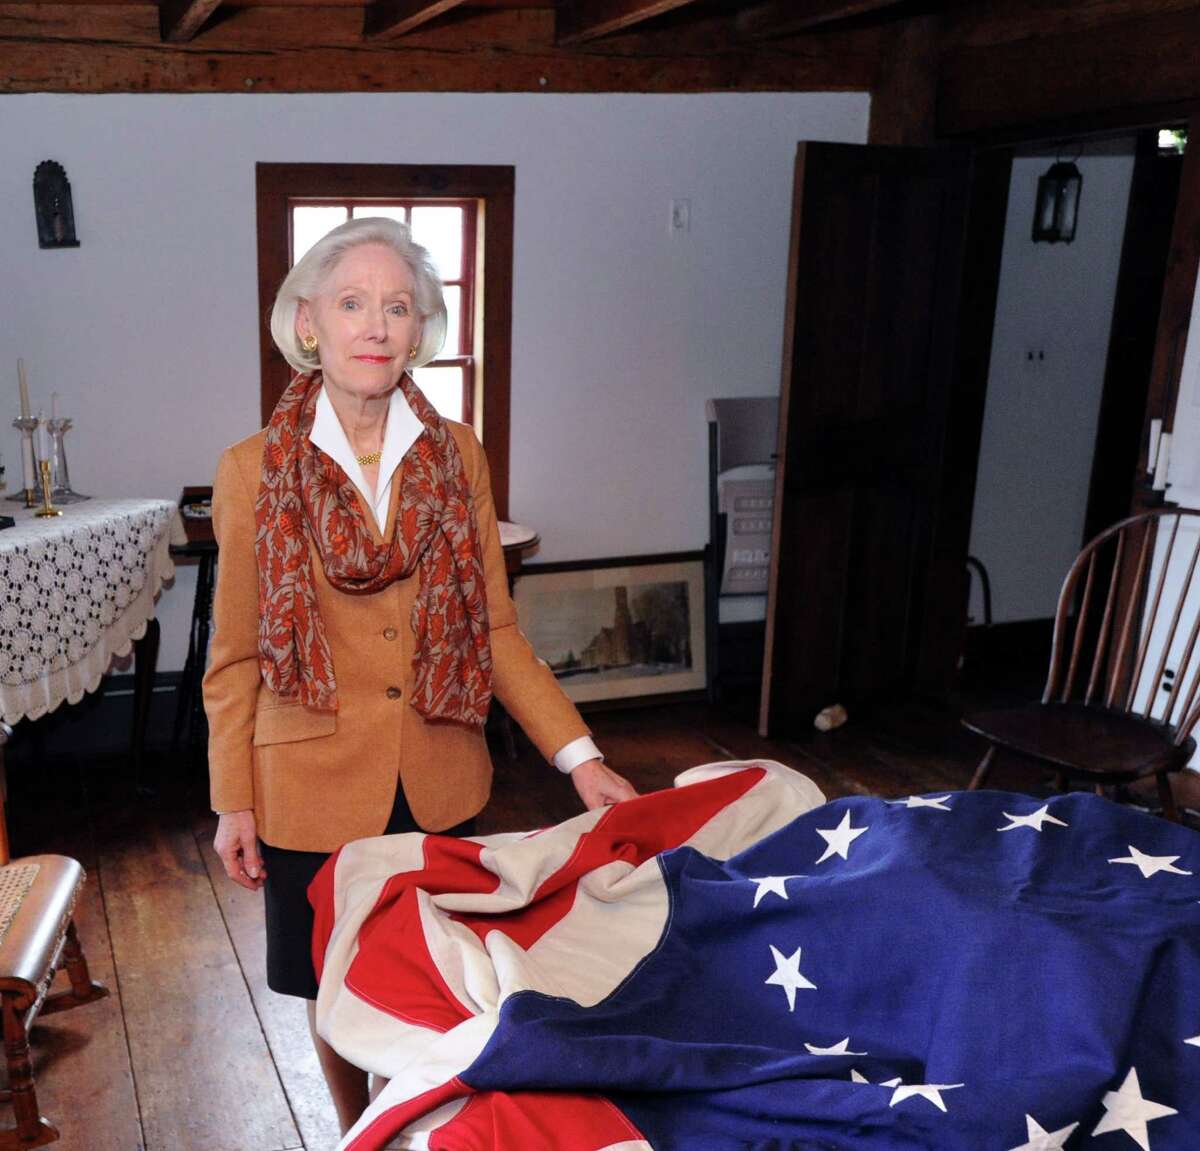 Davidde Strackbein, chair of the 375th Anniversary Committee, with a Betsy Ross replica flag of United States of America, inside historic Putnam Cottage at 243 E. Putnam Ave., Greenwich, Conn., Wednesday, Jan. 14, 2015. Greenwich is celebrating the 375th anniversary of its founding. On Sunday, Feb. 22, the Daughters of the American Revolution will provide a re-enactment at Putnam Hill Park featuring Gen. Israel Putnam's escape from invading British forces in 1779. Town officials will also rededicate Putnam Hill Park and there will be public tours of Putnam Cottage.